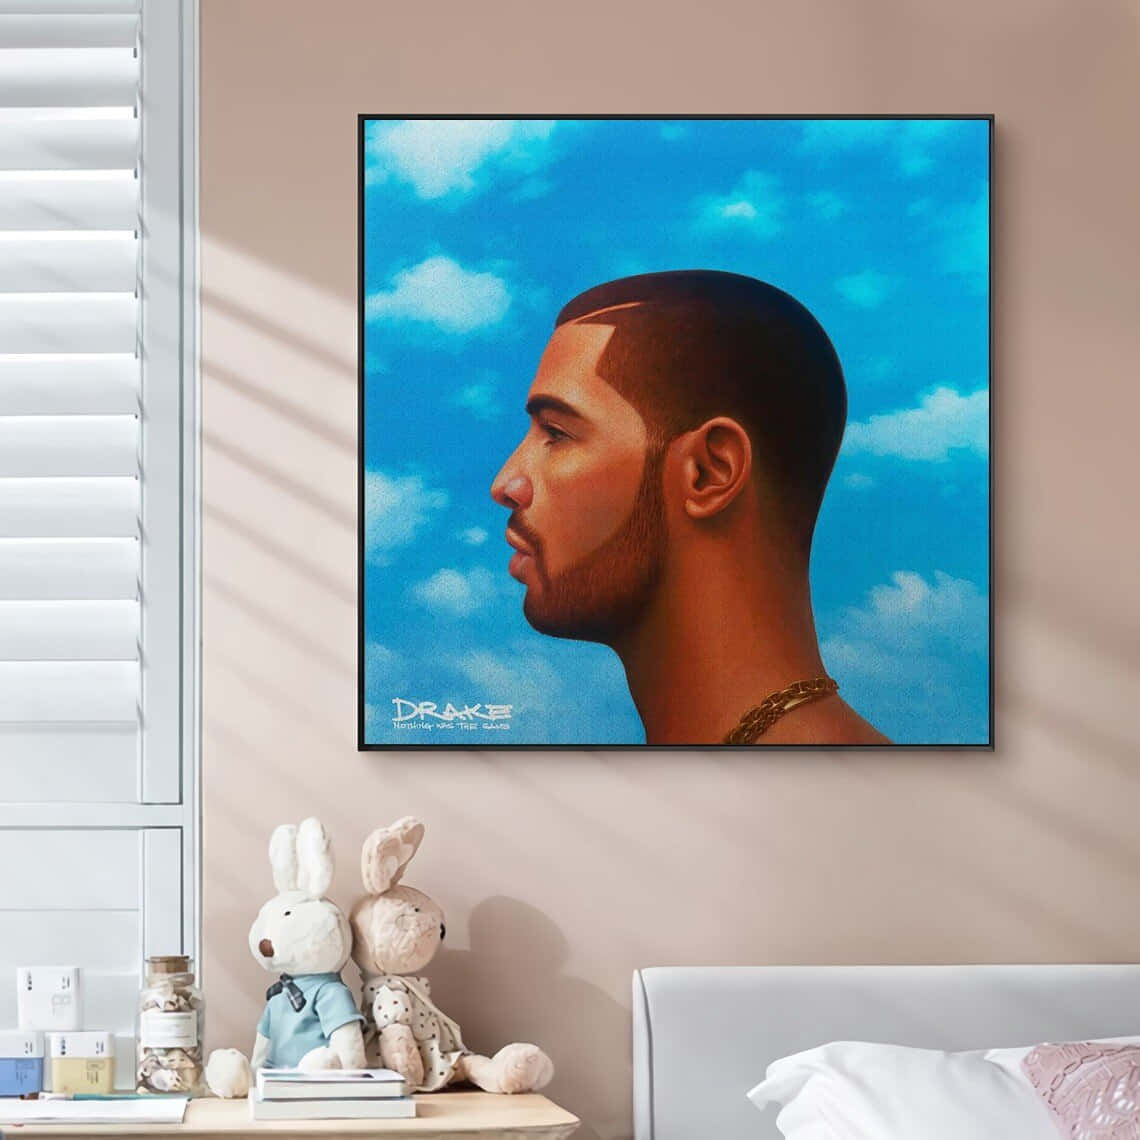 Drake in his Nothing Was The Same album cover Wallpaper